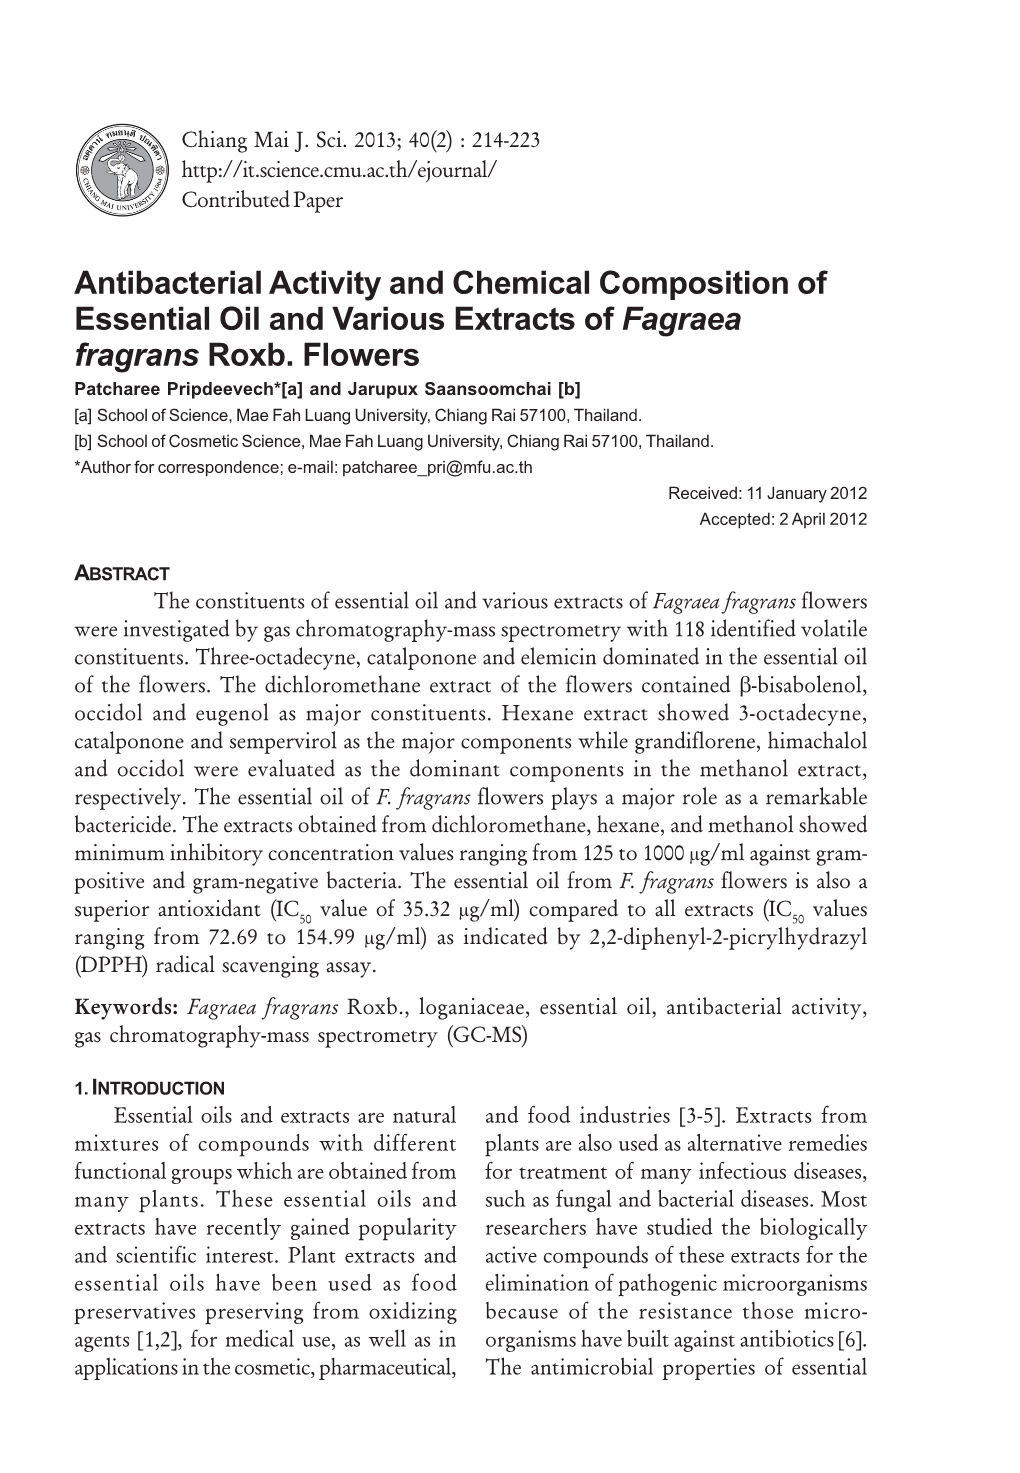 Antibacterial Activity and Chemical Composition of Essential Oil and Various Extracts of Fagraea Fragrans Roxb. Flowers